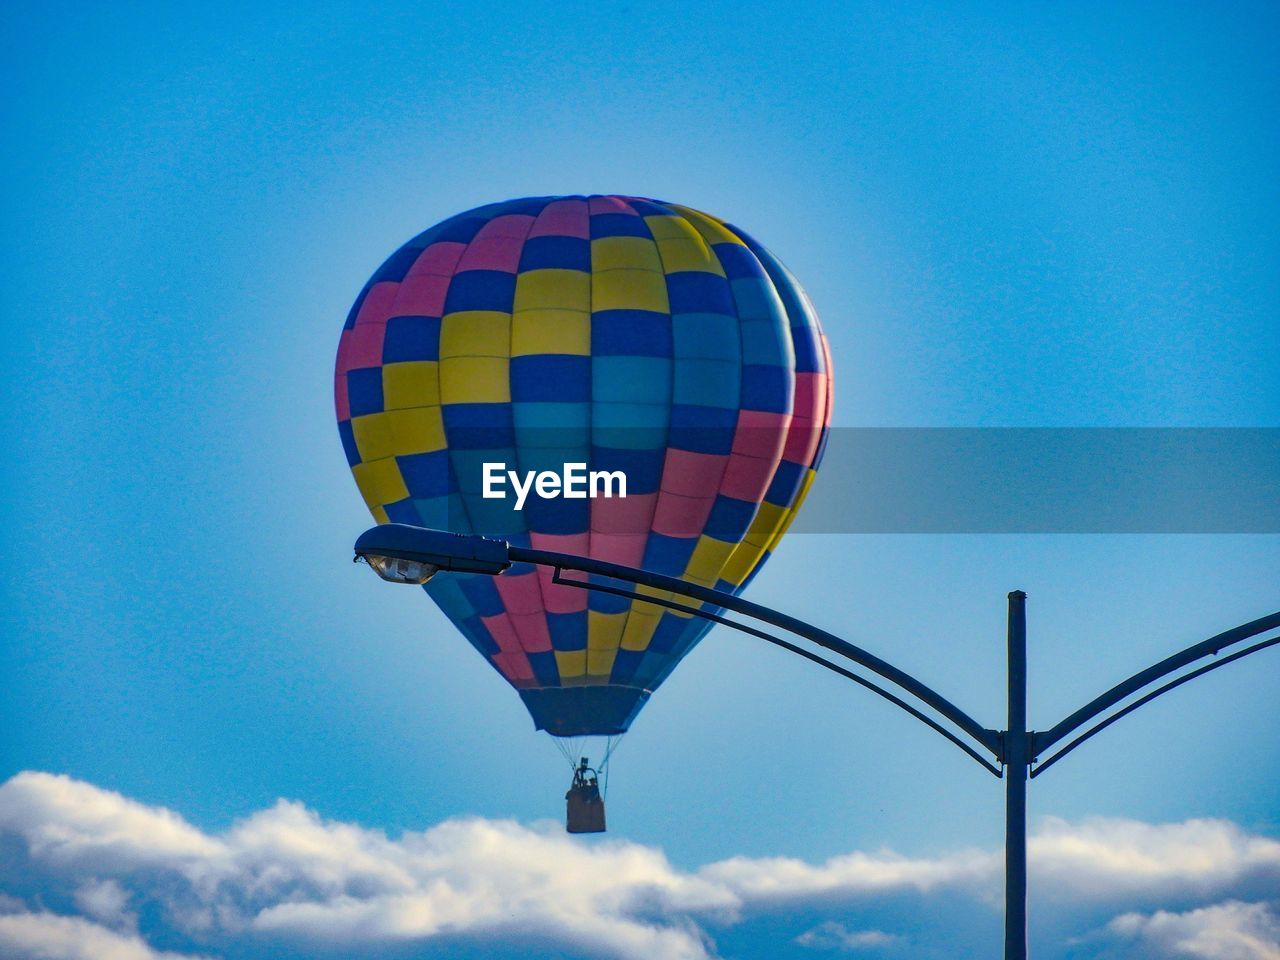 LOW ANGLE VIEW OF HOT AIR BALLOONS FLYING AGAINST BLUE SKY